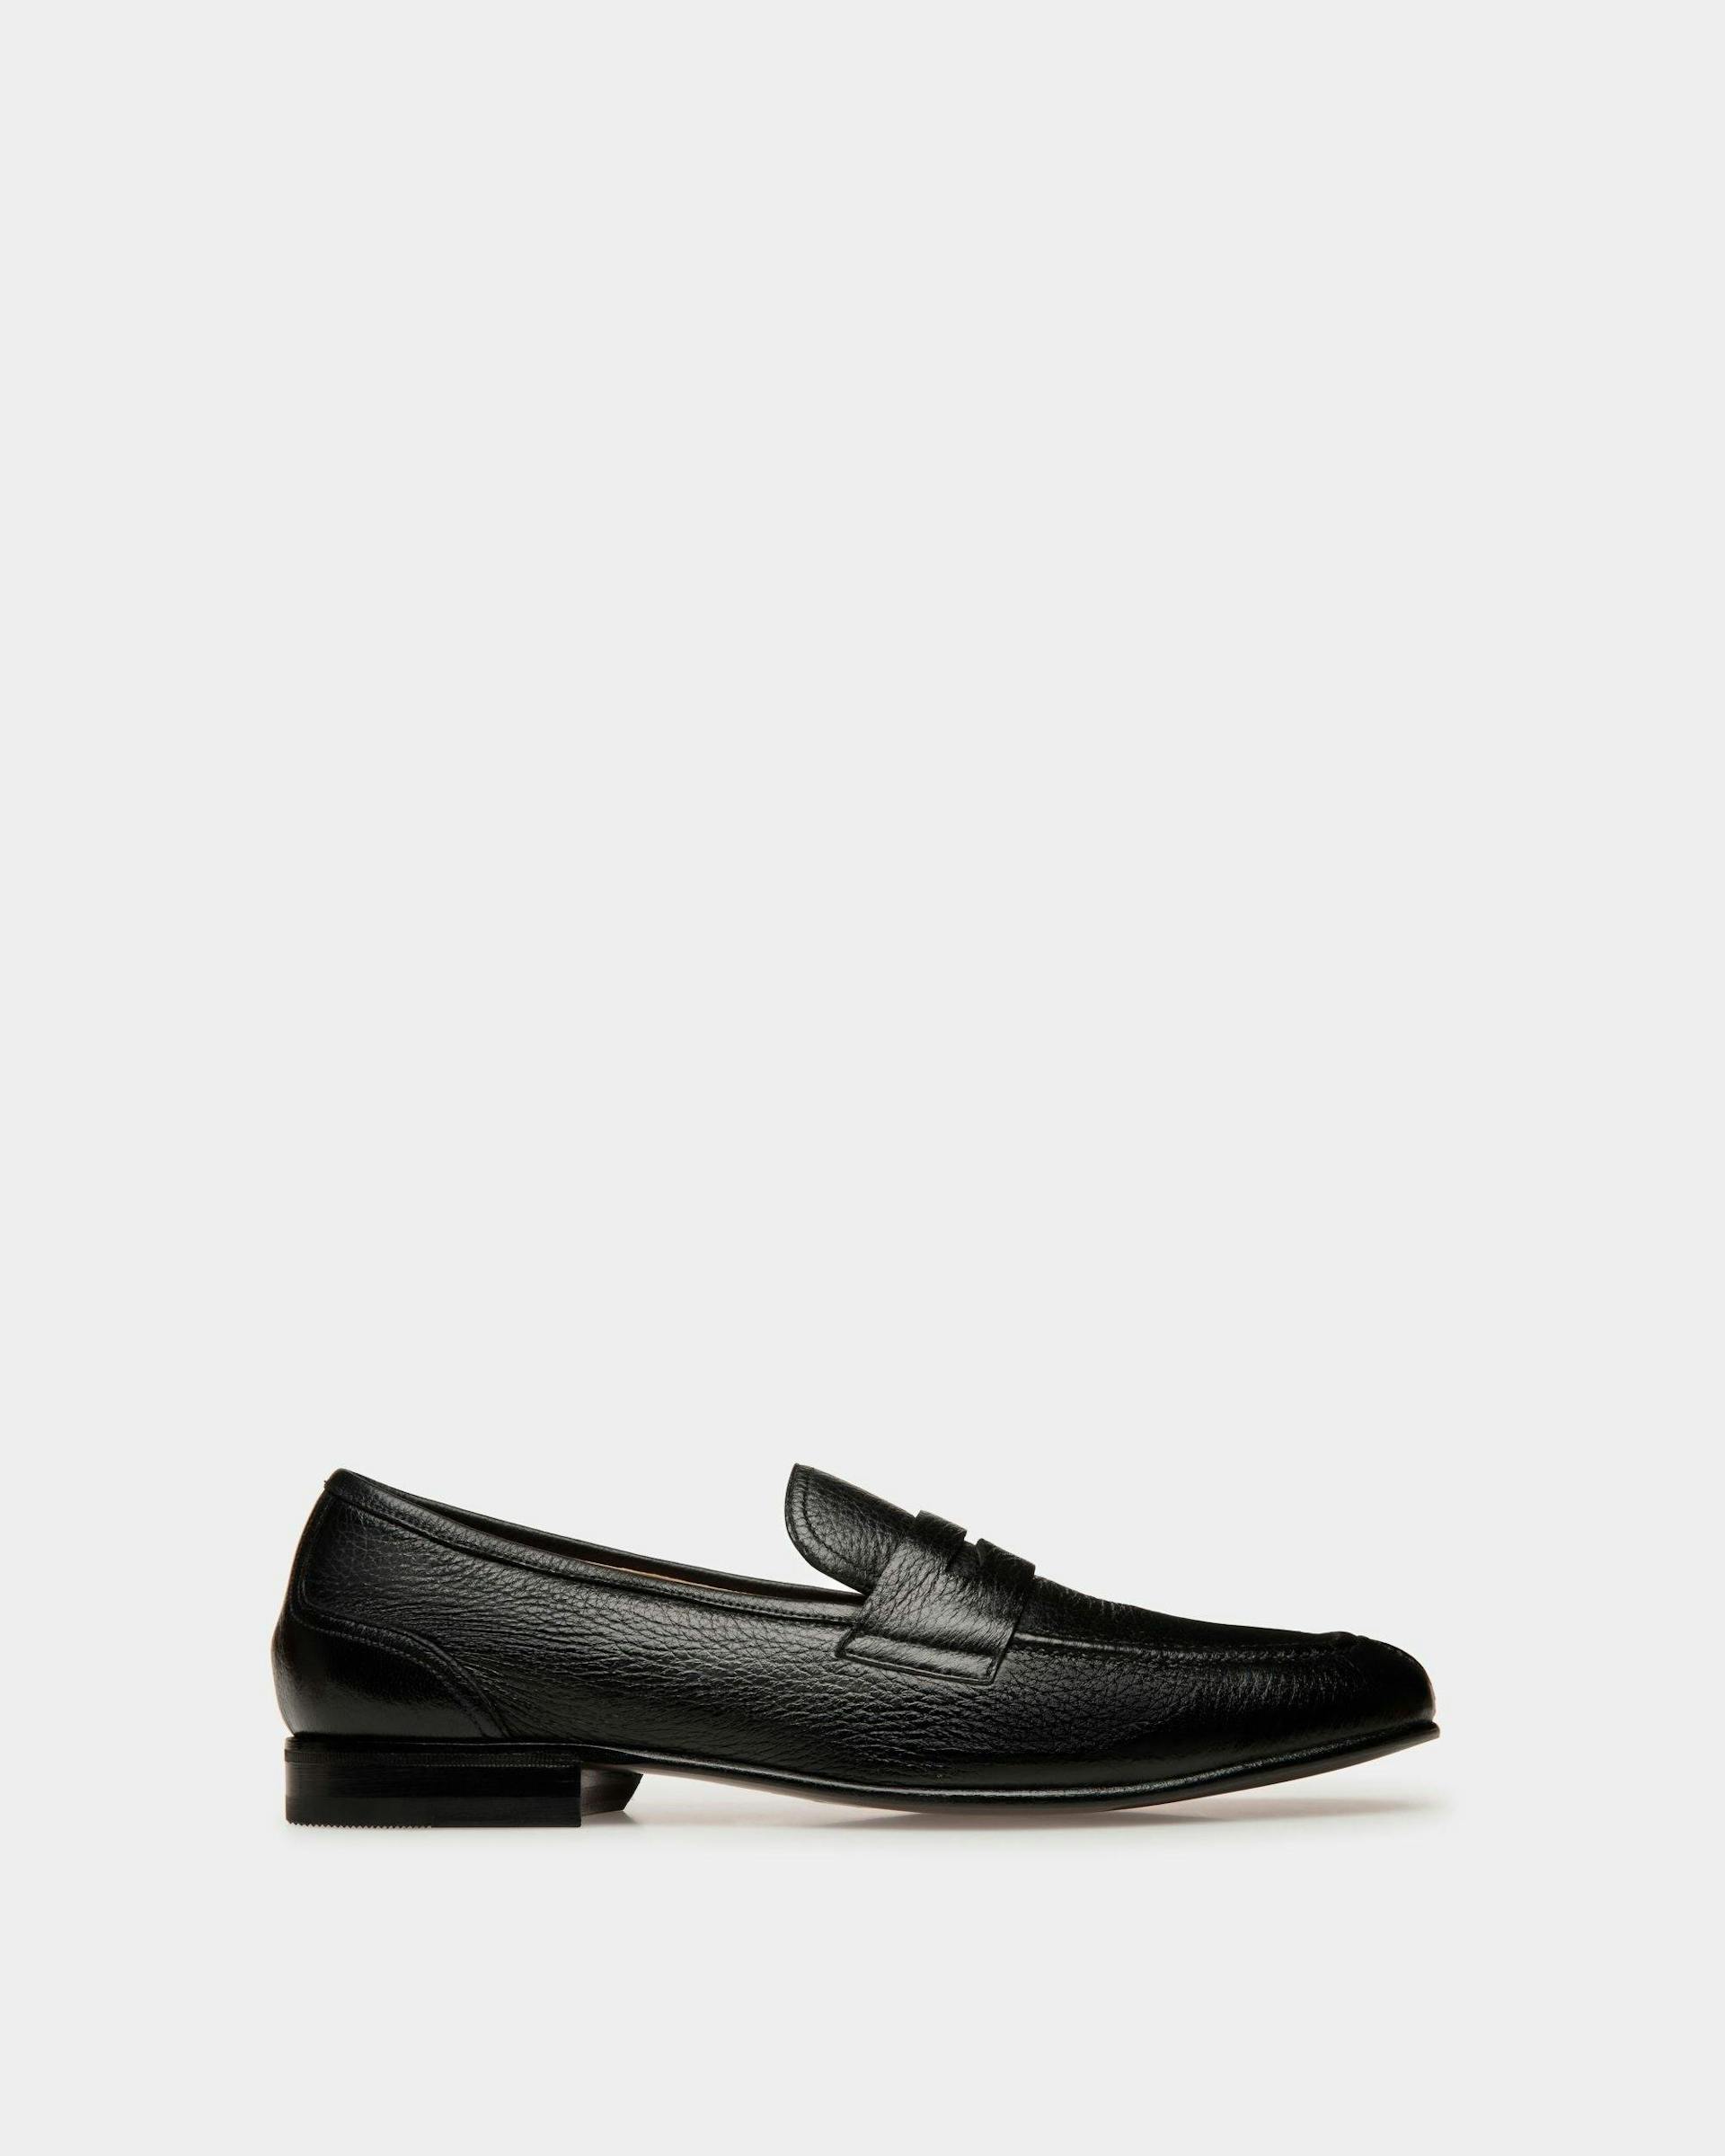 Suisse Loafer - Bally